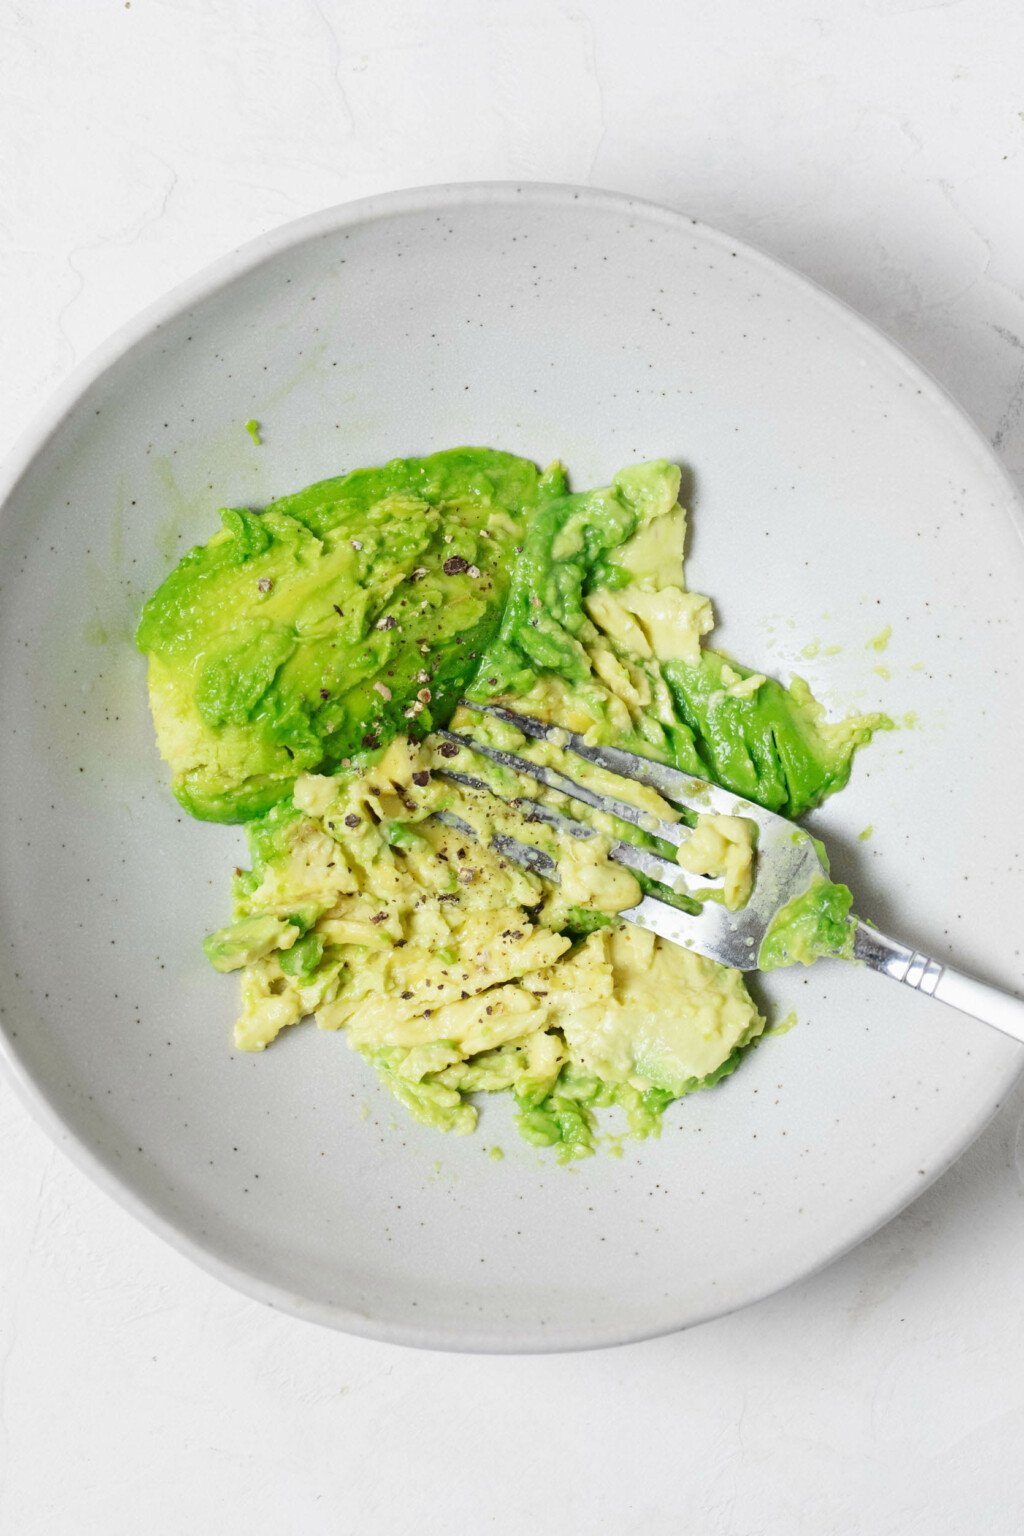 An image of a small white bowl, which is filled with bright green mashed avocado.